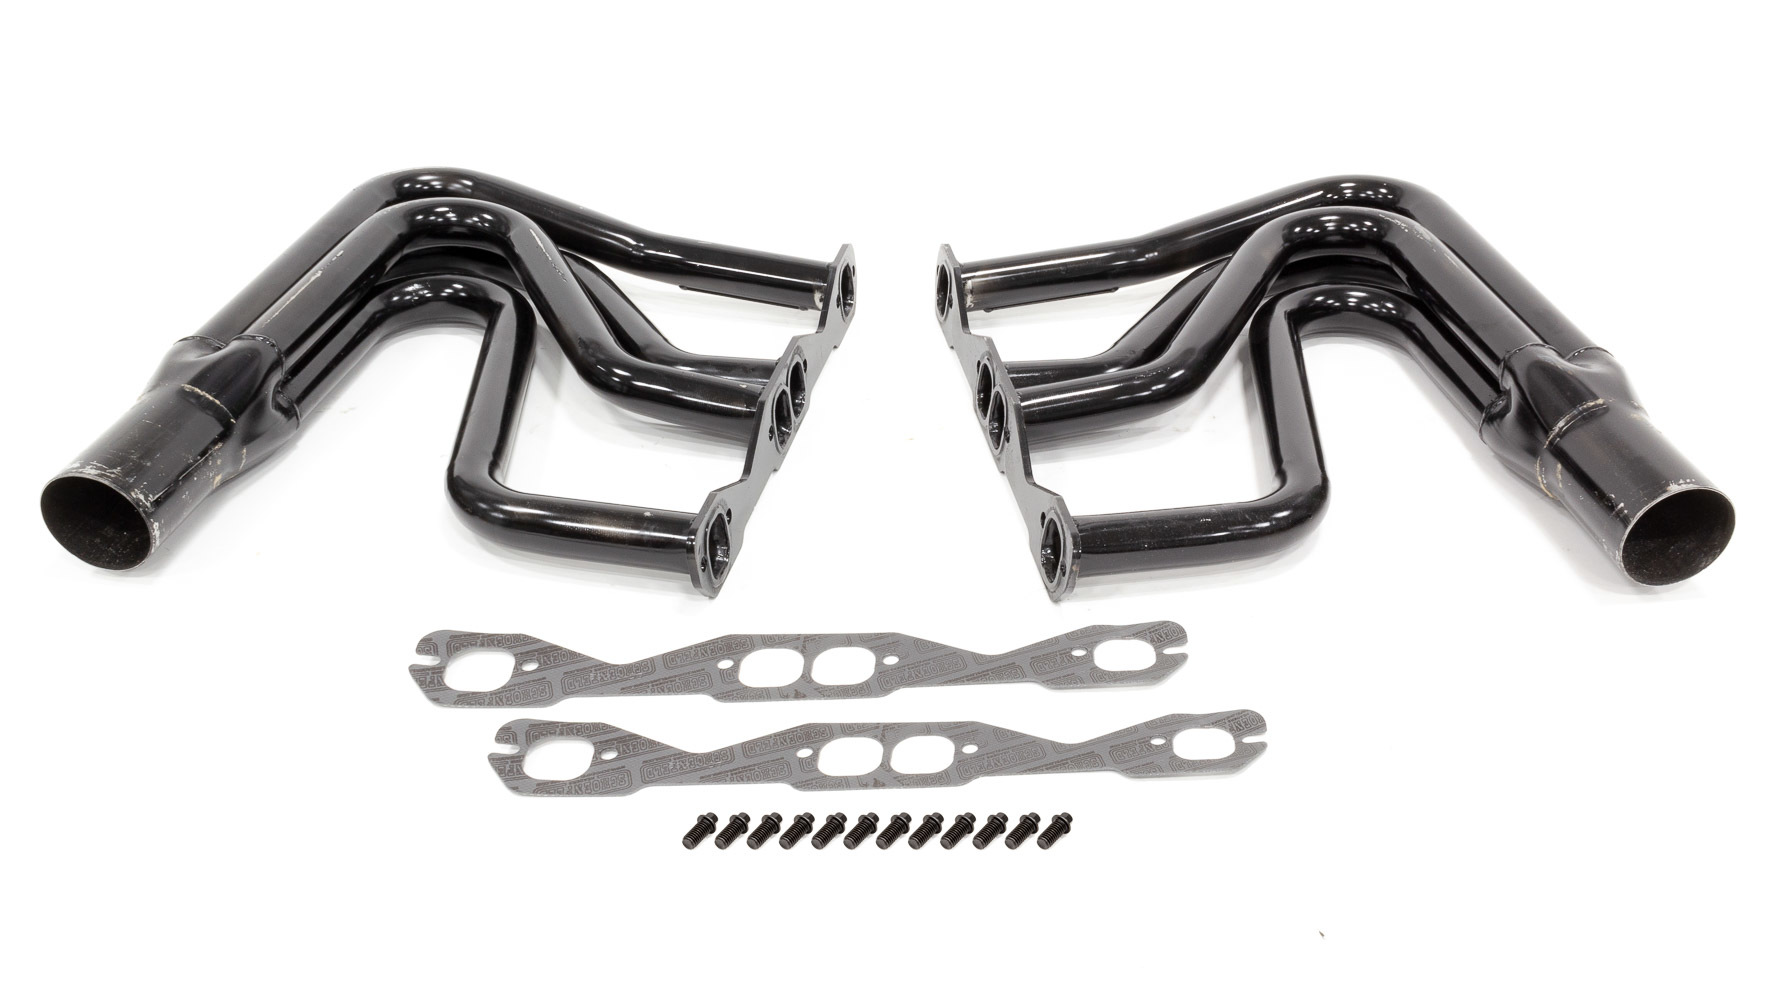 Schoenfeld Headers 1122BCM2 - Headers, DIRT Modified, 1-5/8 in Primary, 3 in Collector, Steel, Black Paint, Small Block Chevy, Kit